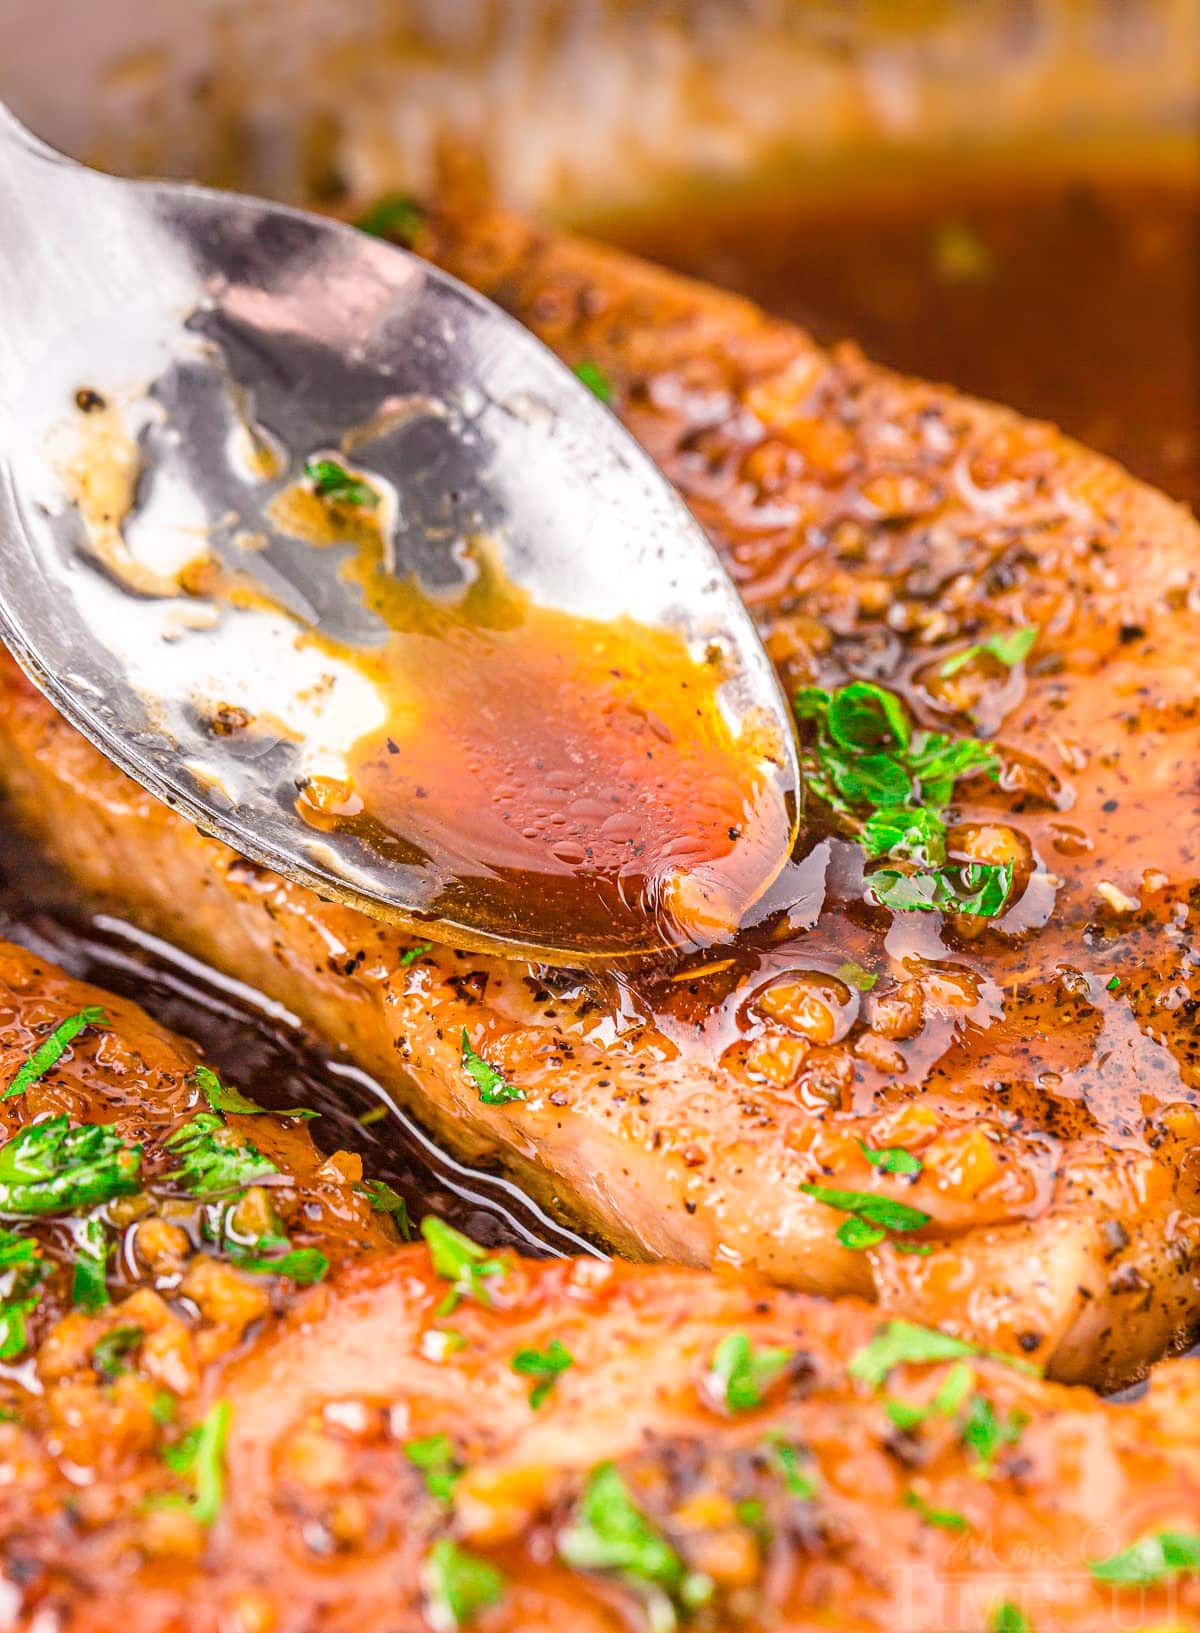 spoonful of glaze being spooned onto a pork chop in a skillet.